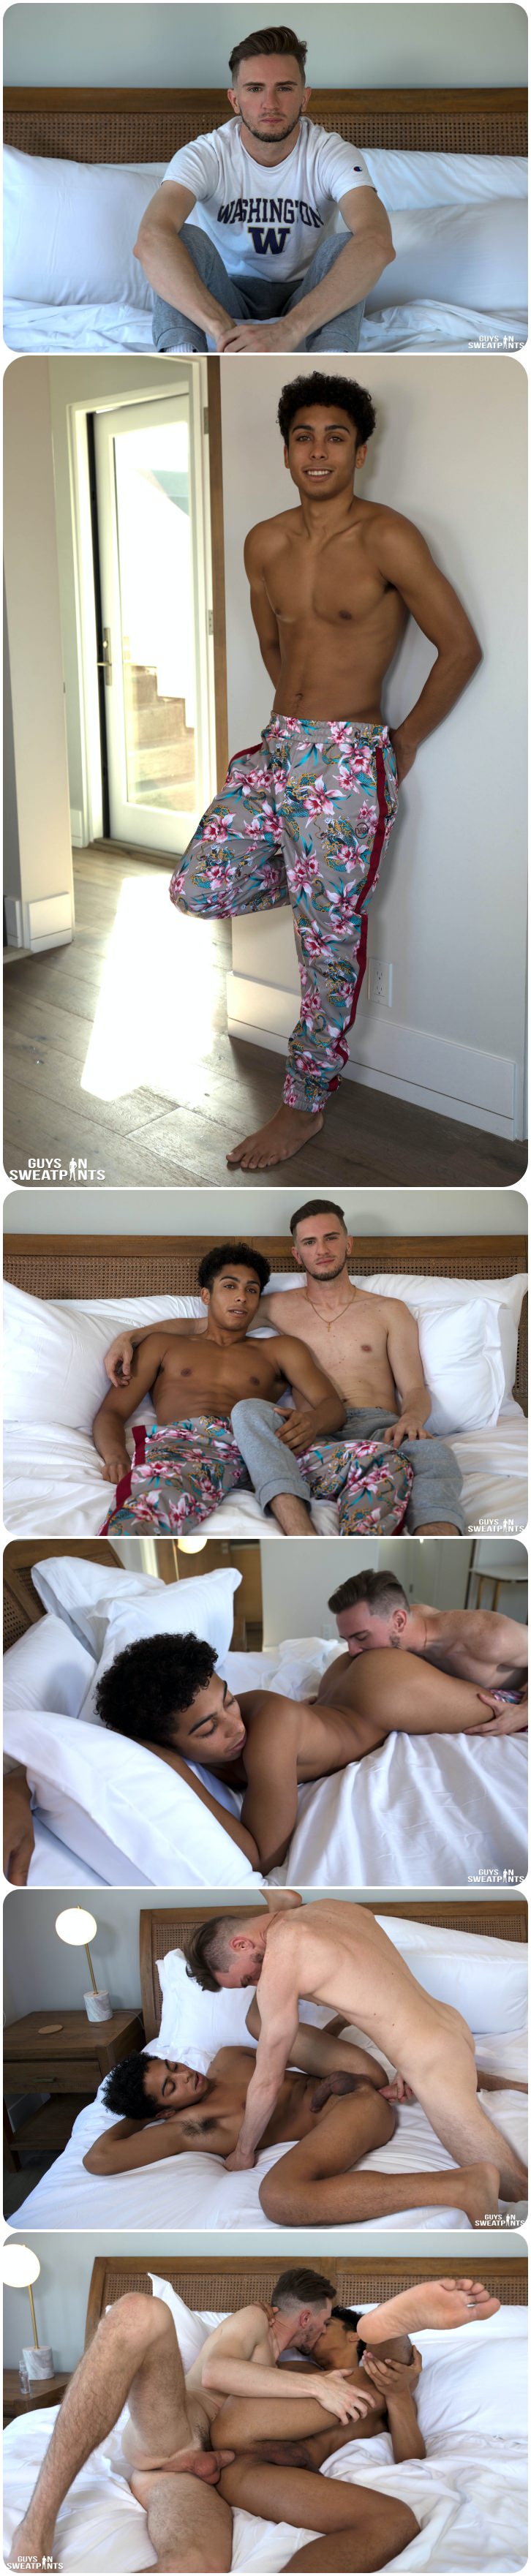 Guys In Sweatpants, Eli Taylor, Marcus Young